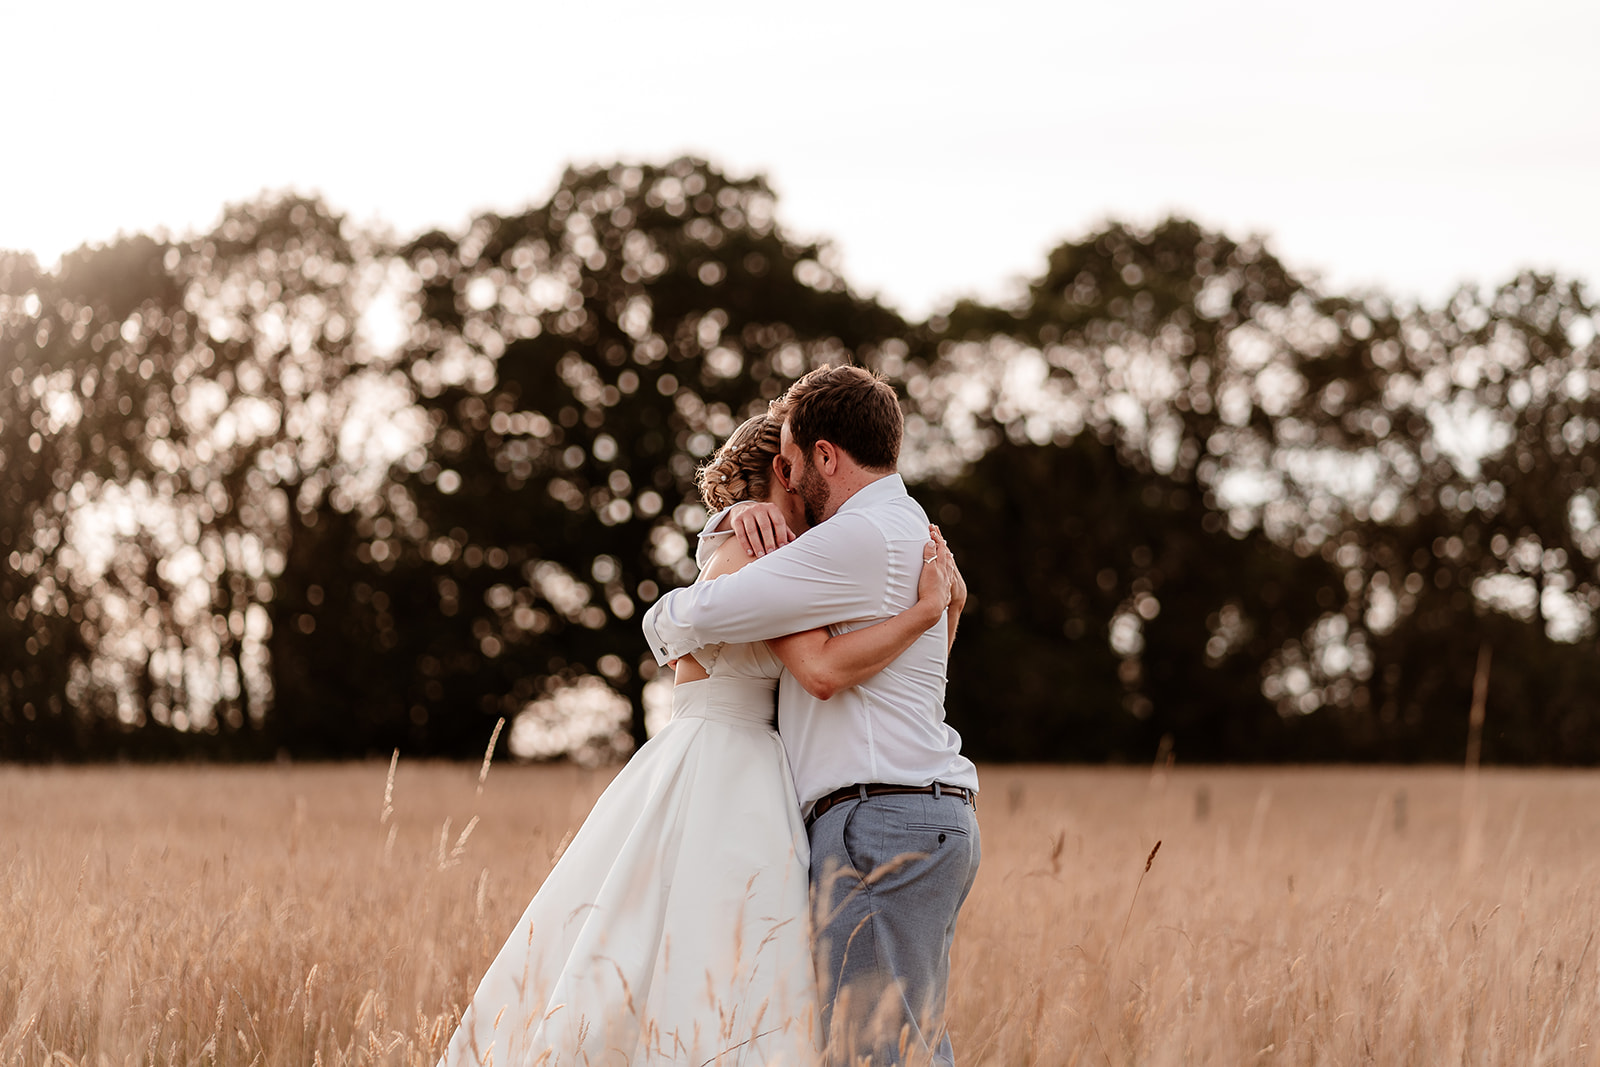 Bride and groom hug together in the golden field at sunset at a summer wedding at Silchester Farm